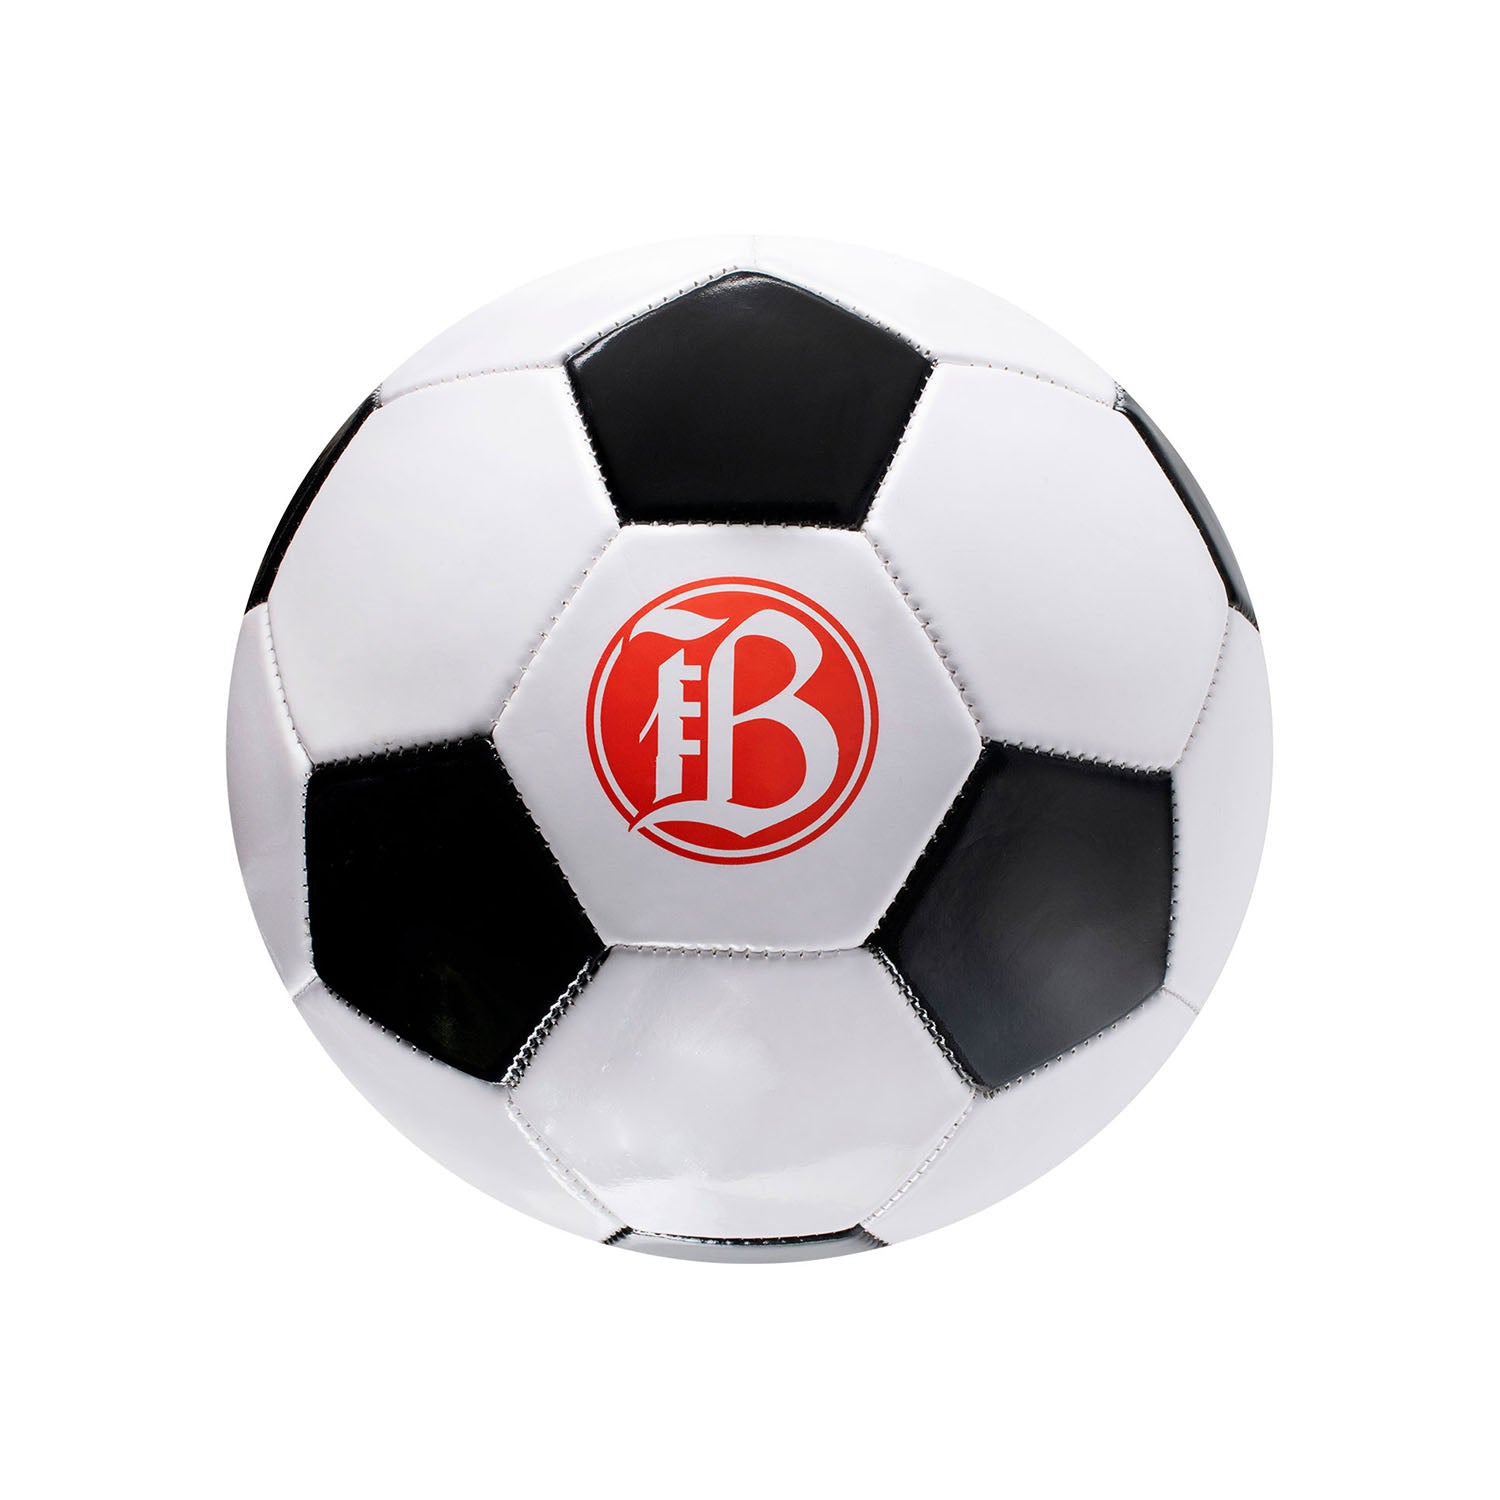 Bay FC Crest Soccer Ball - Crest Front View